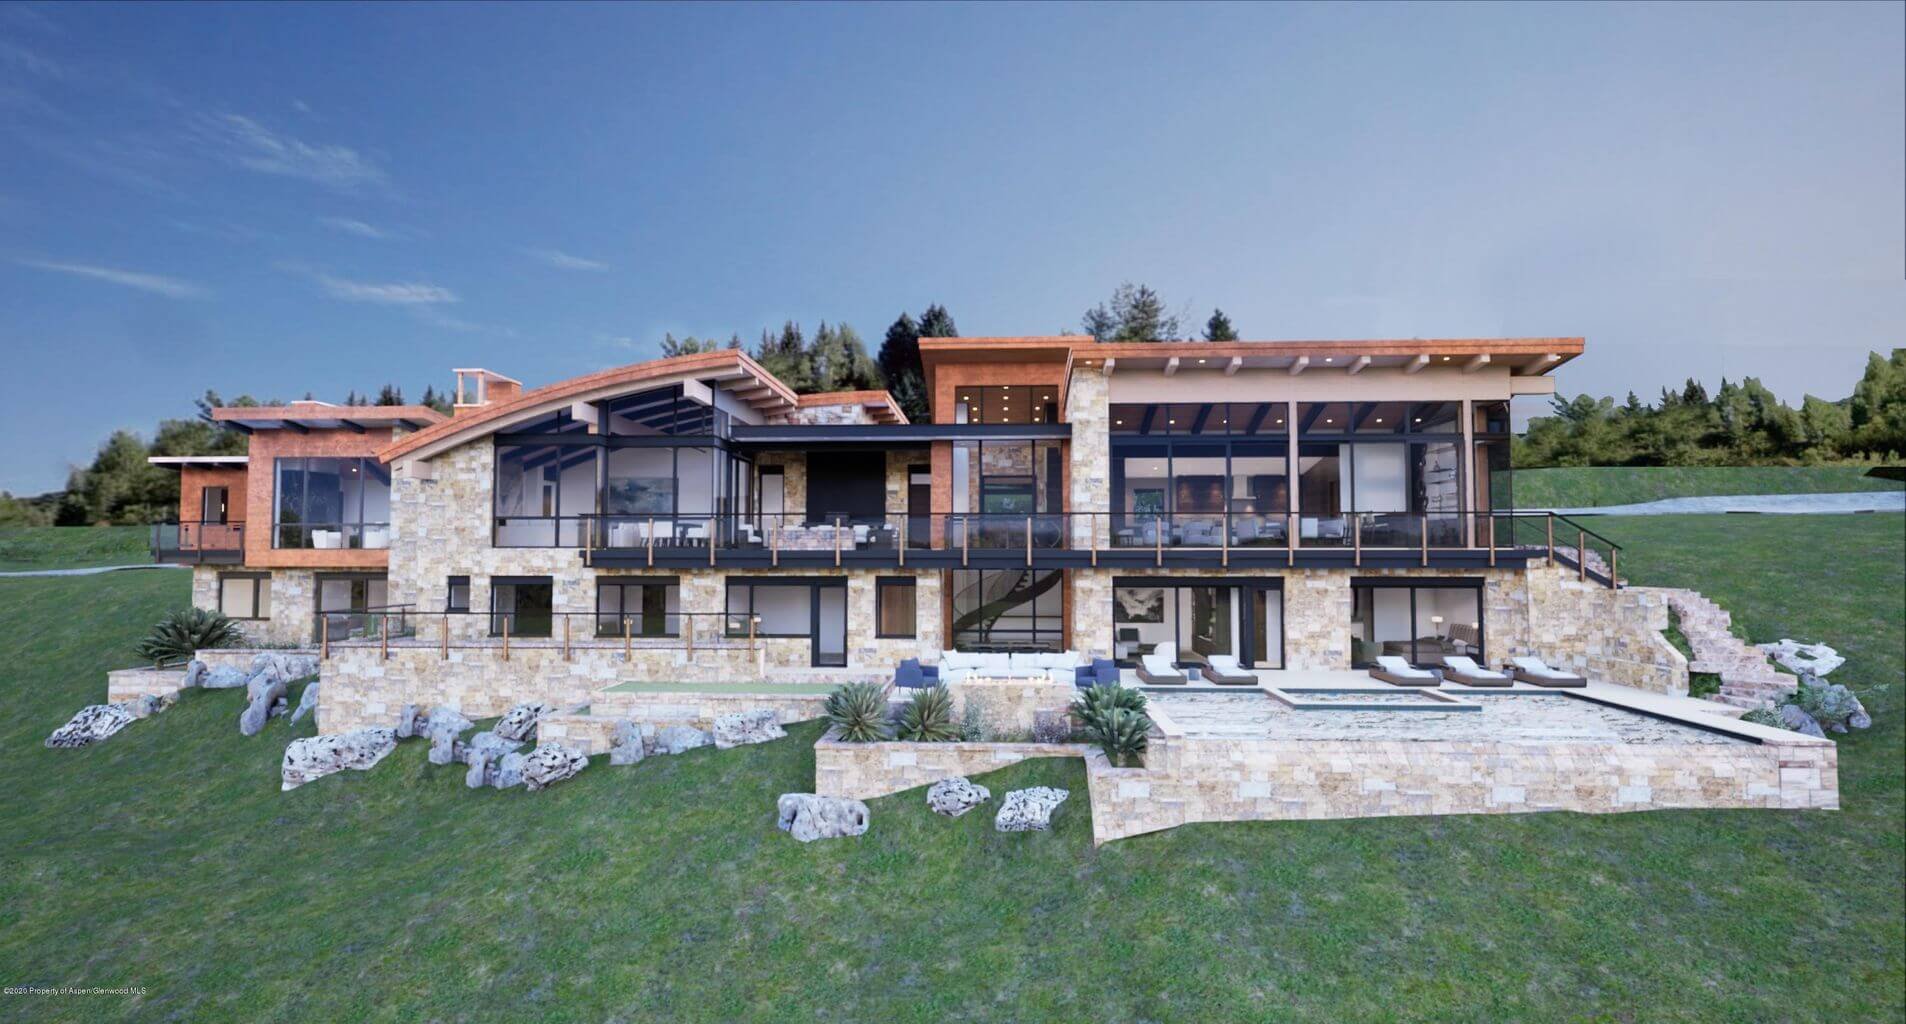 70 Pitkin Way, off Willoughy Way on Red Mountain, Sells Pre-completion Summer 2021 at $24.33M/$2,889 SF Image